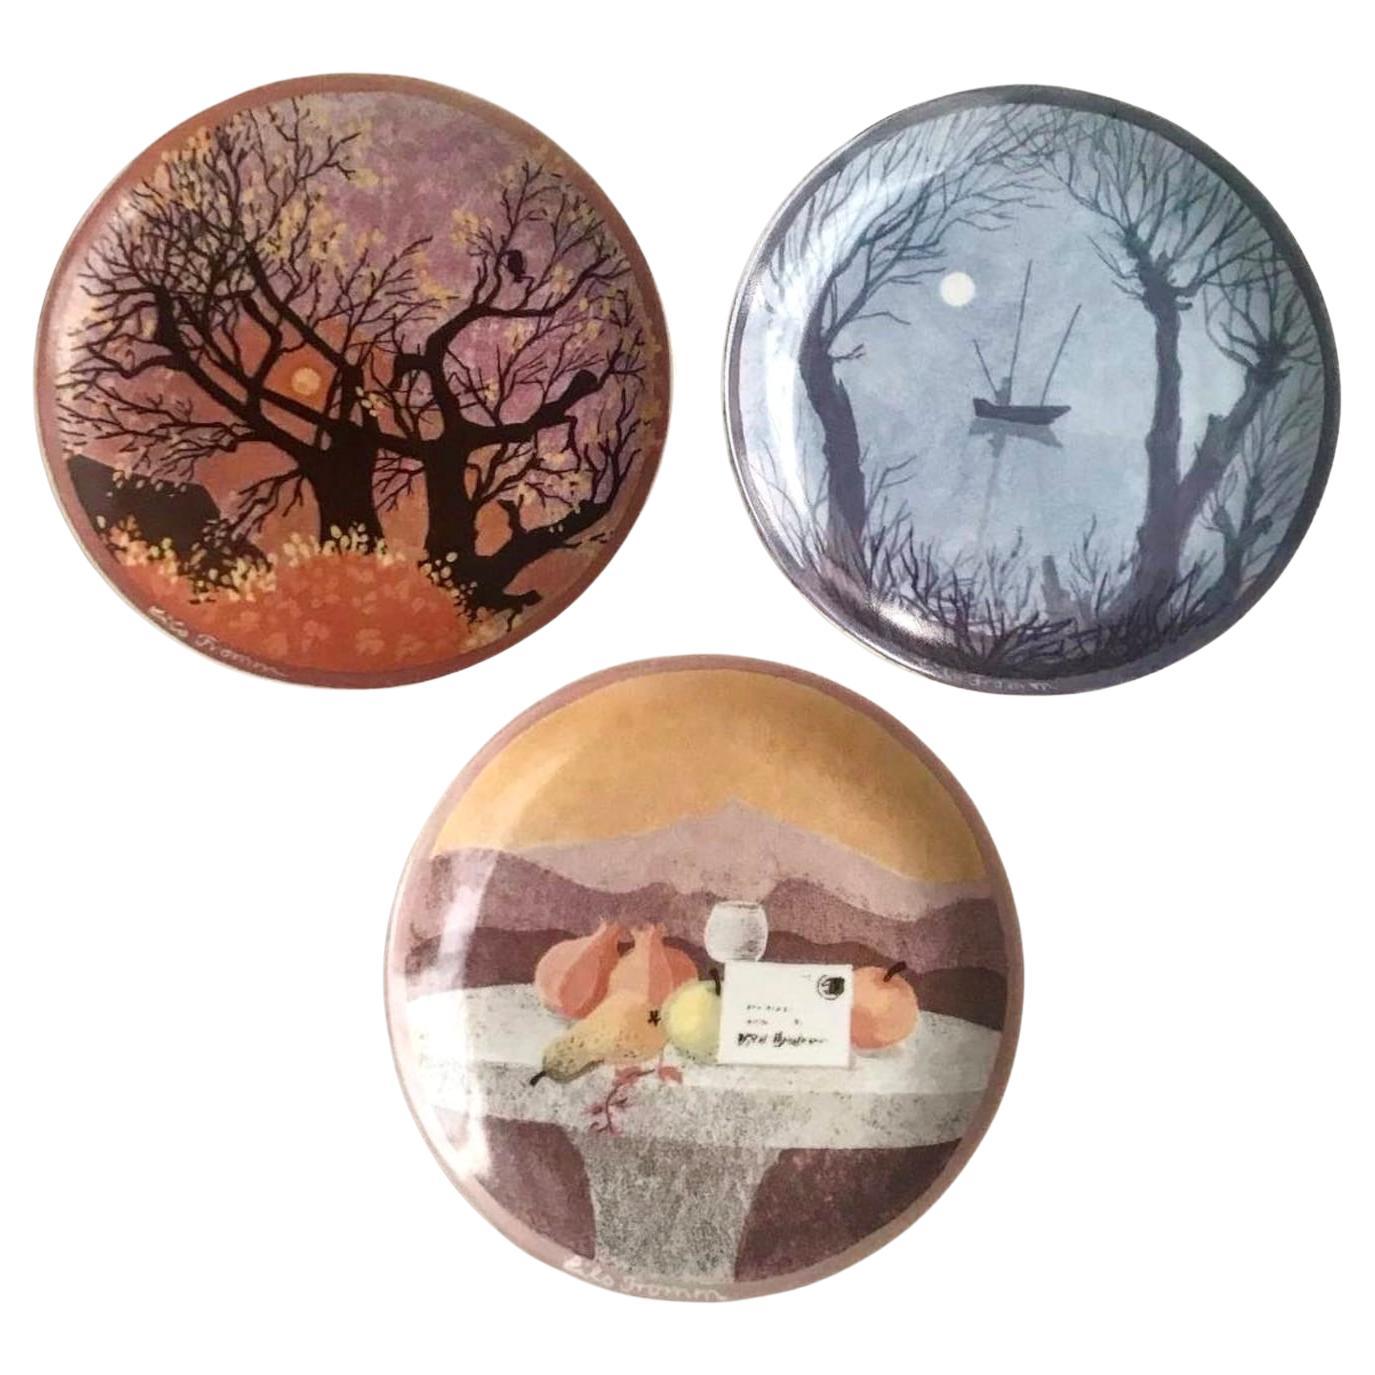 Lilo Fromm Decorative Plates  Sophienthal Wall Plates “Autumn” series “Seasons”